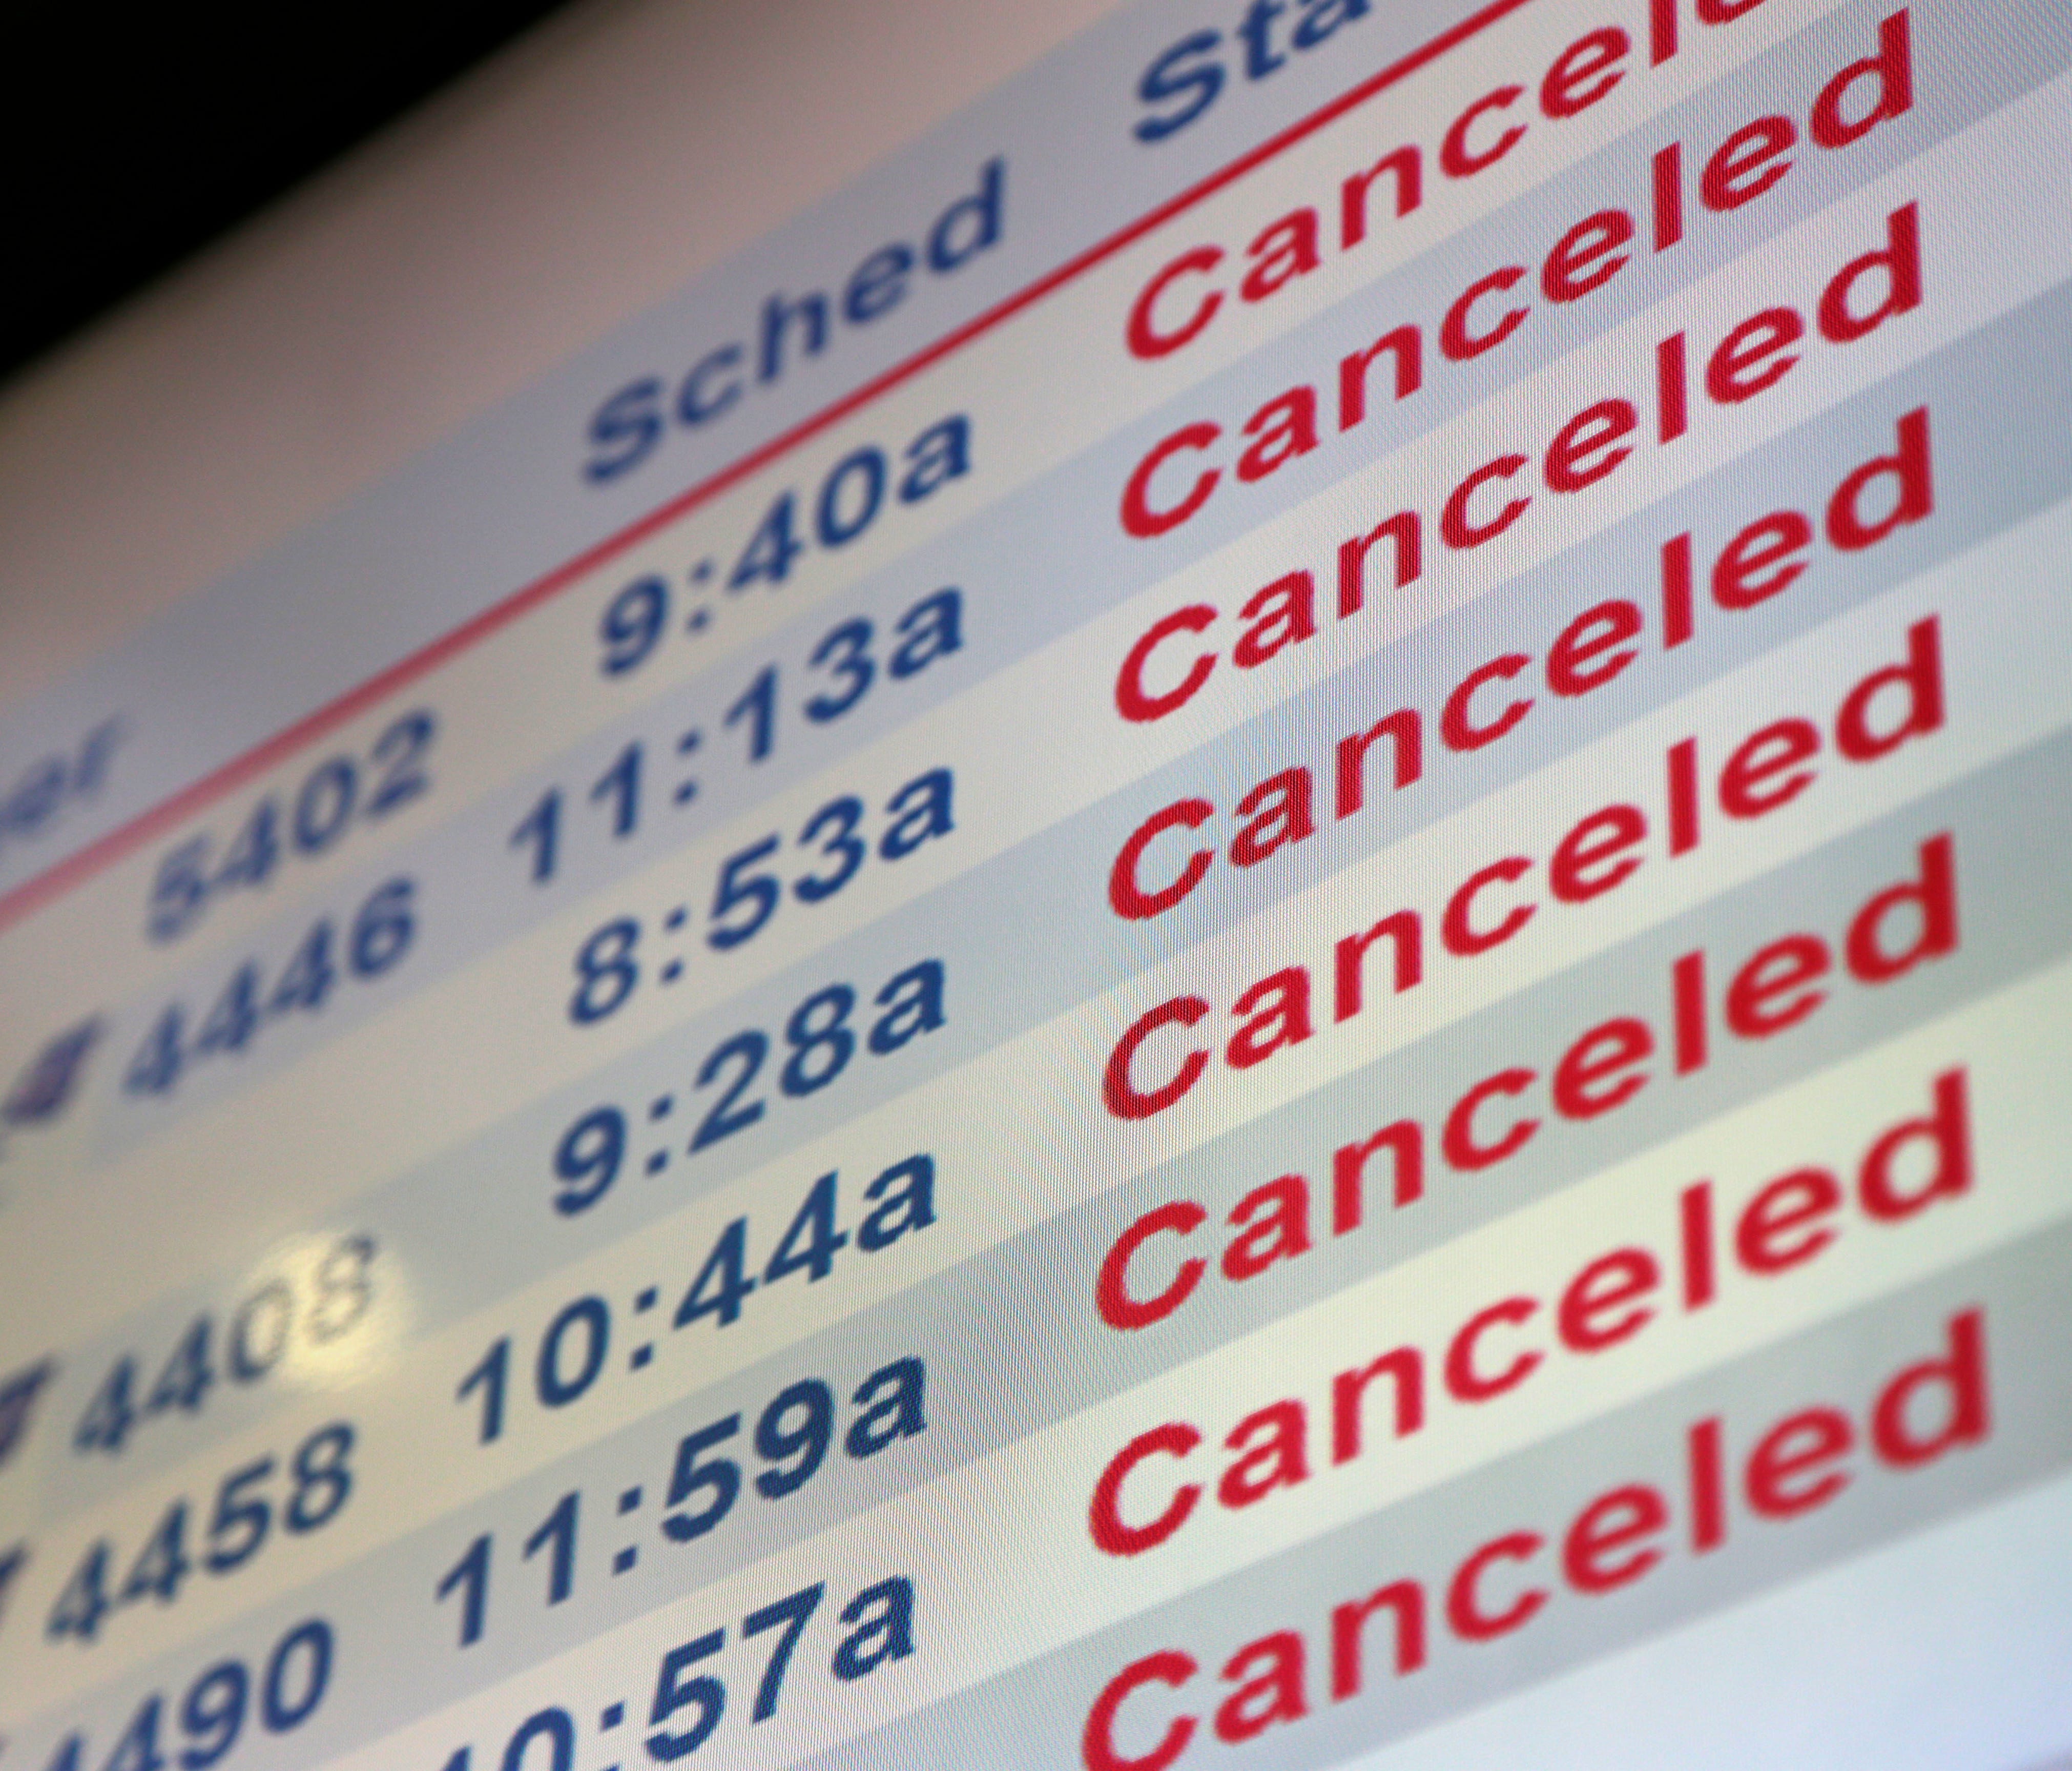 Screens display canceled flights at Newark Liberty International Airport on Tuesday, March 14, 2017.